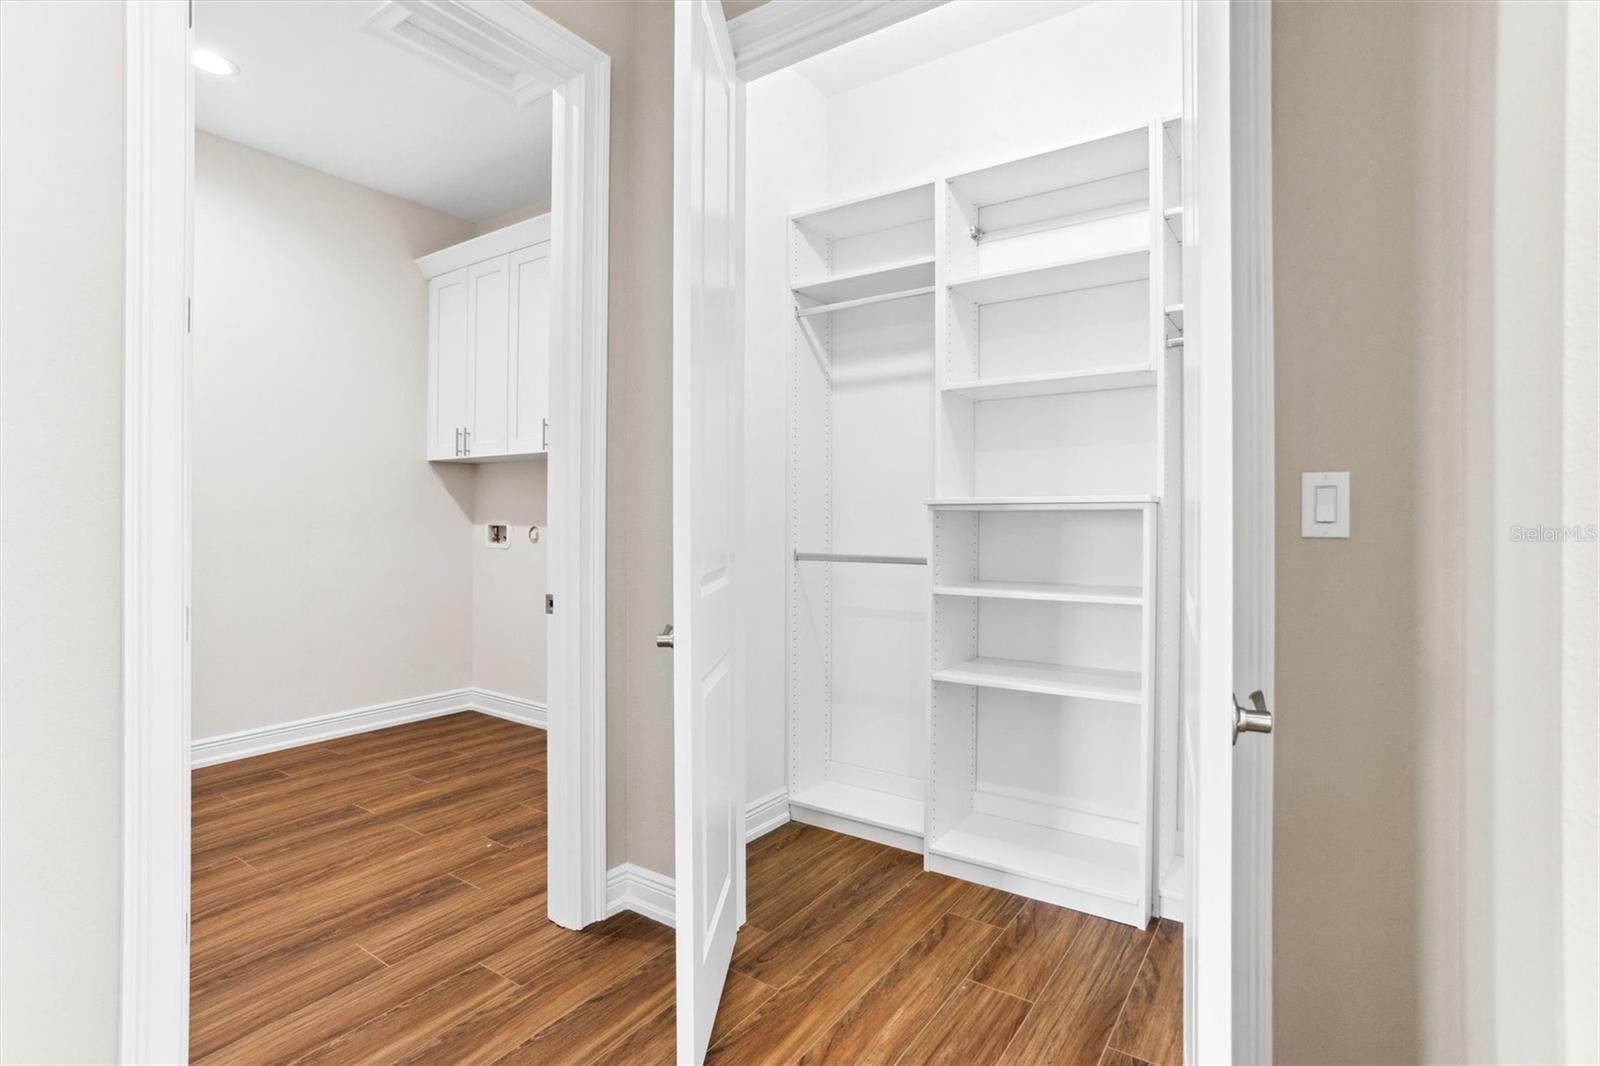 Extra-large hall closet next to huge Laundry room door on left.